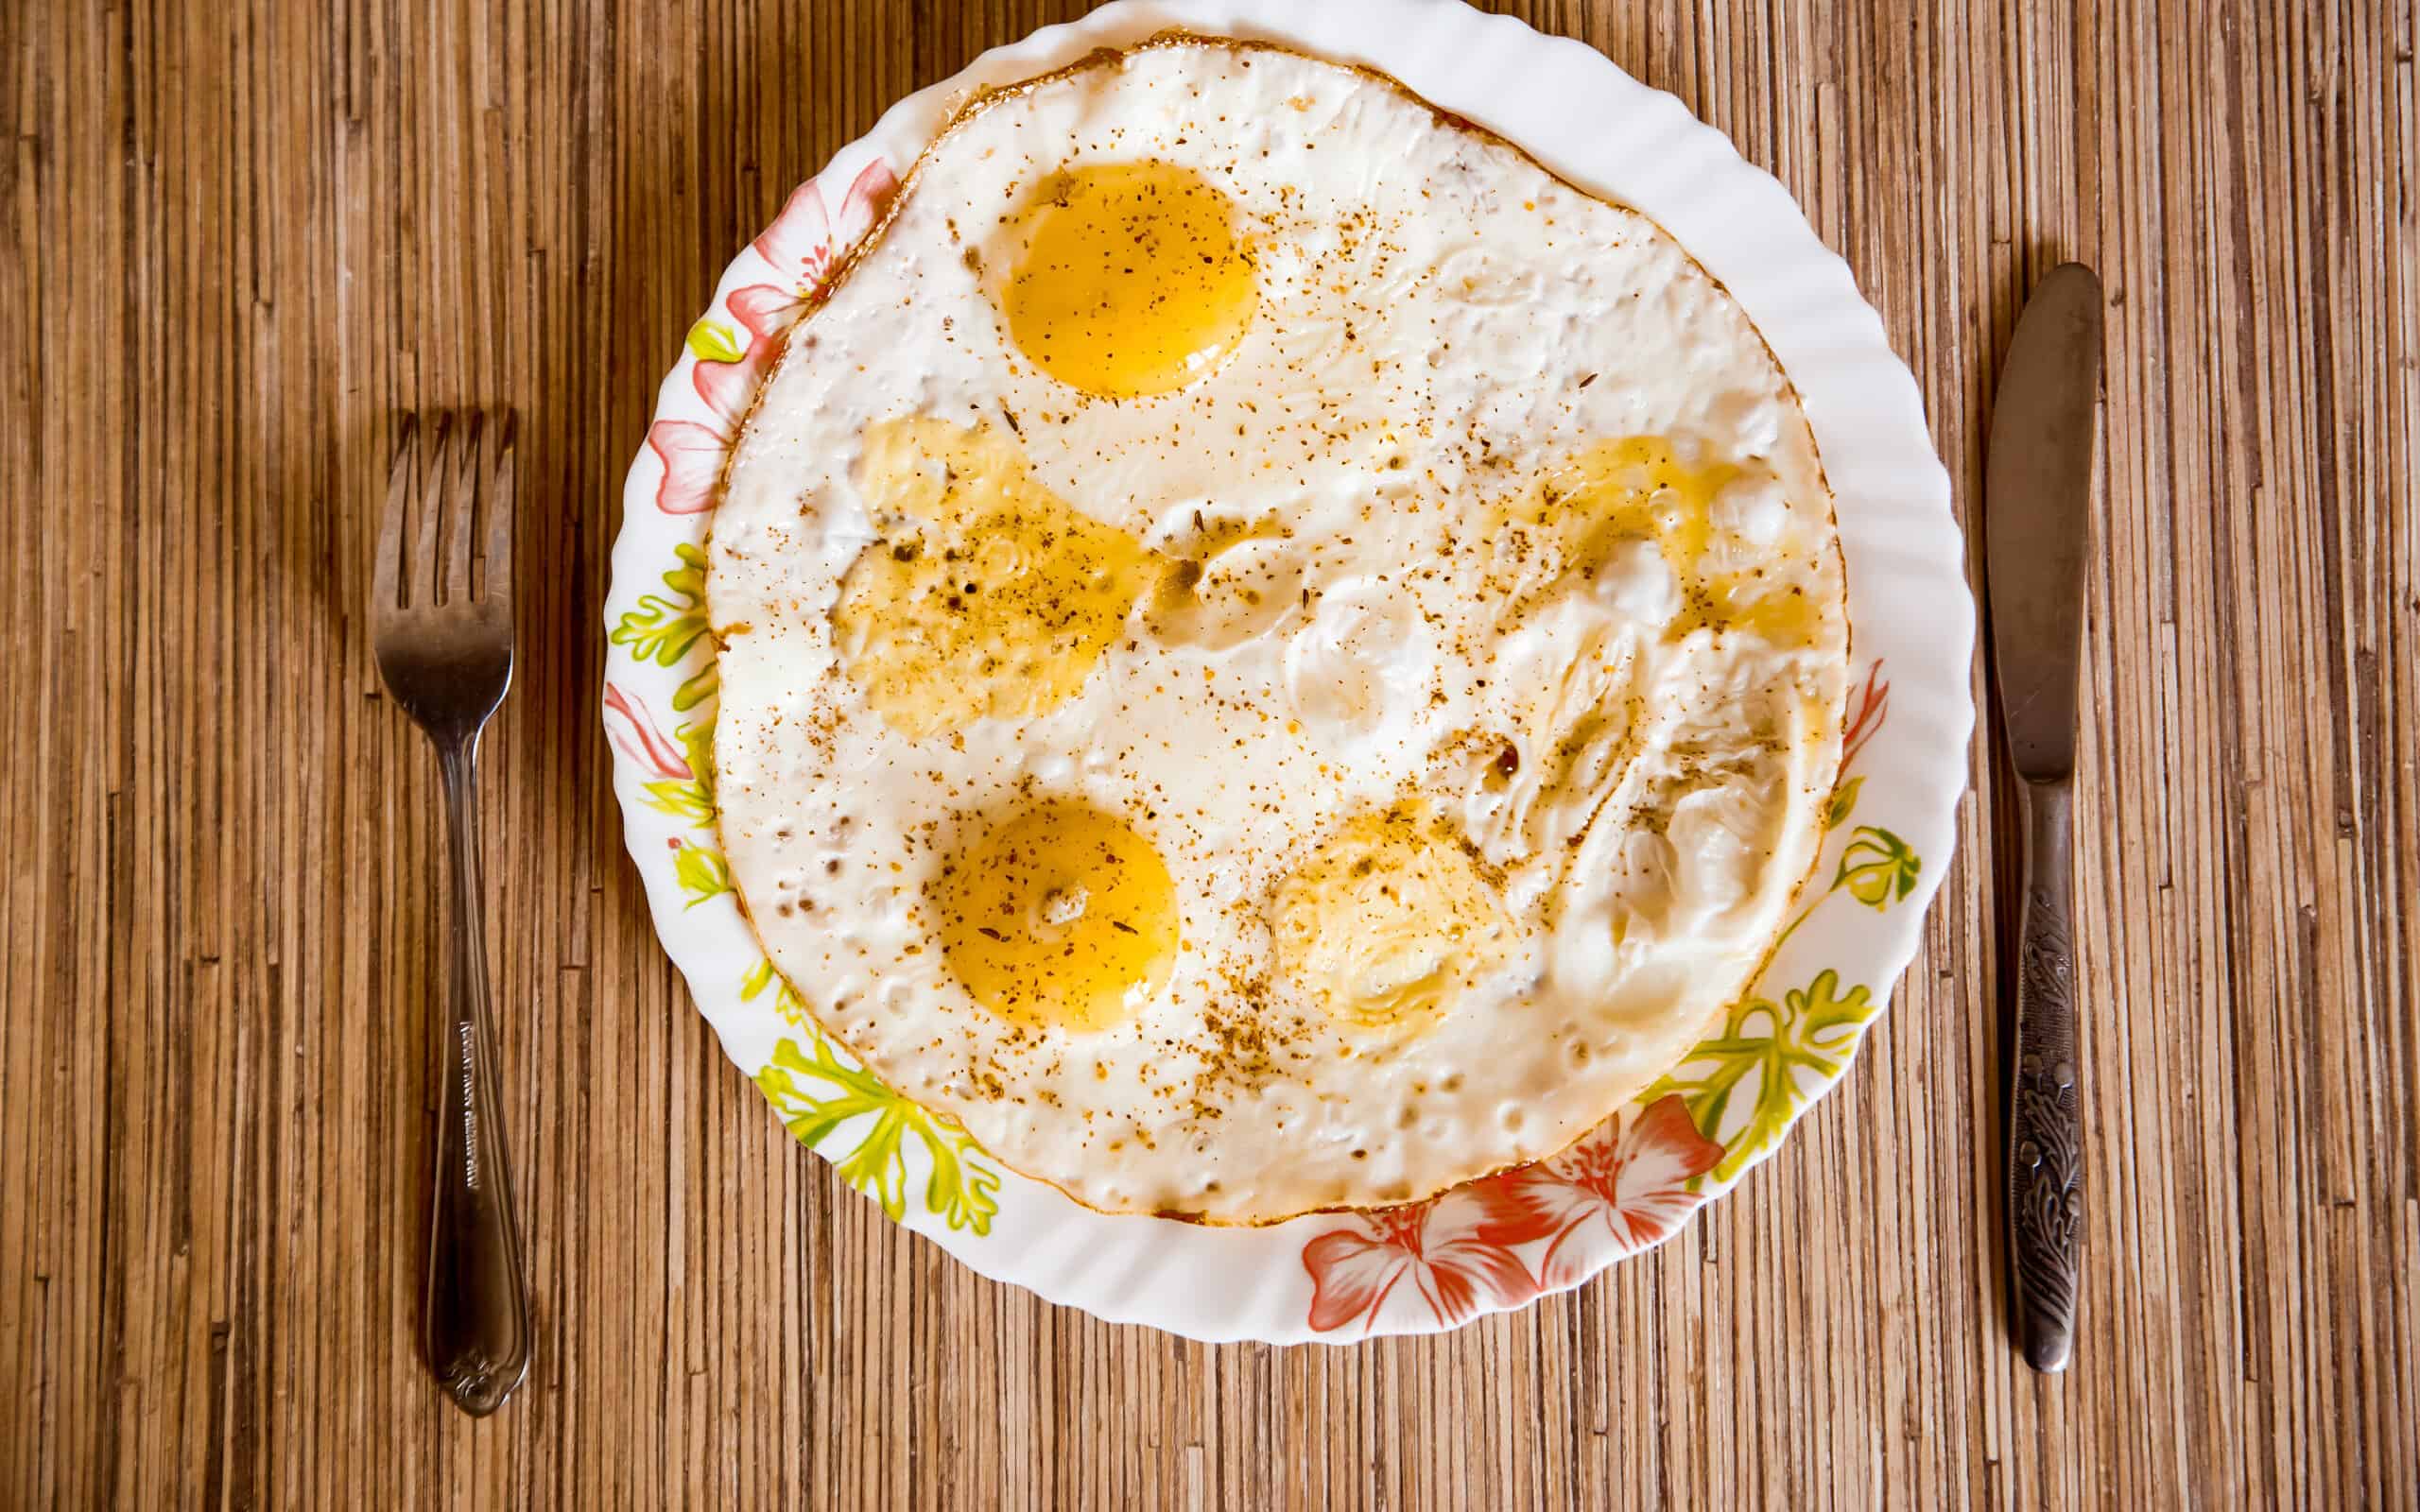 Fried eggs lie on a plate on a wooden table